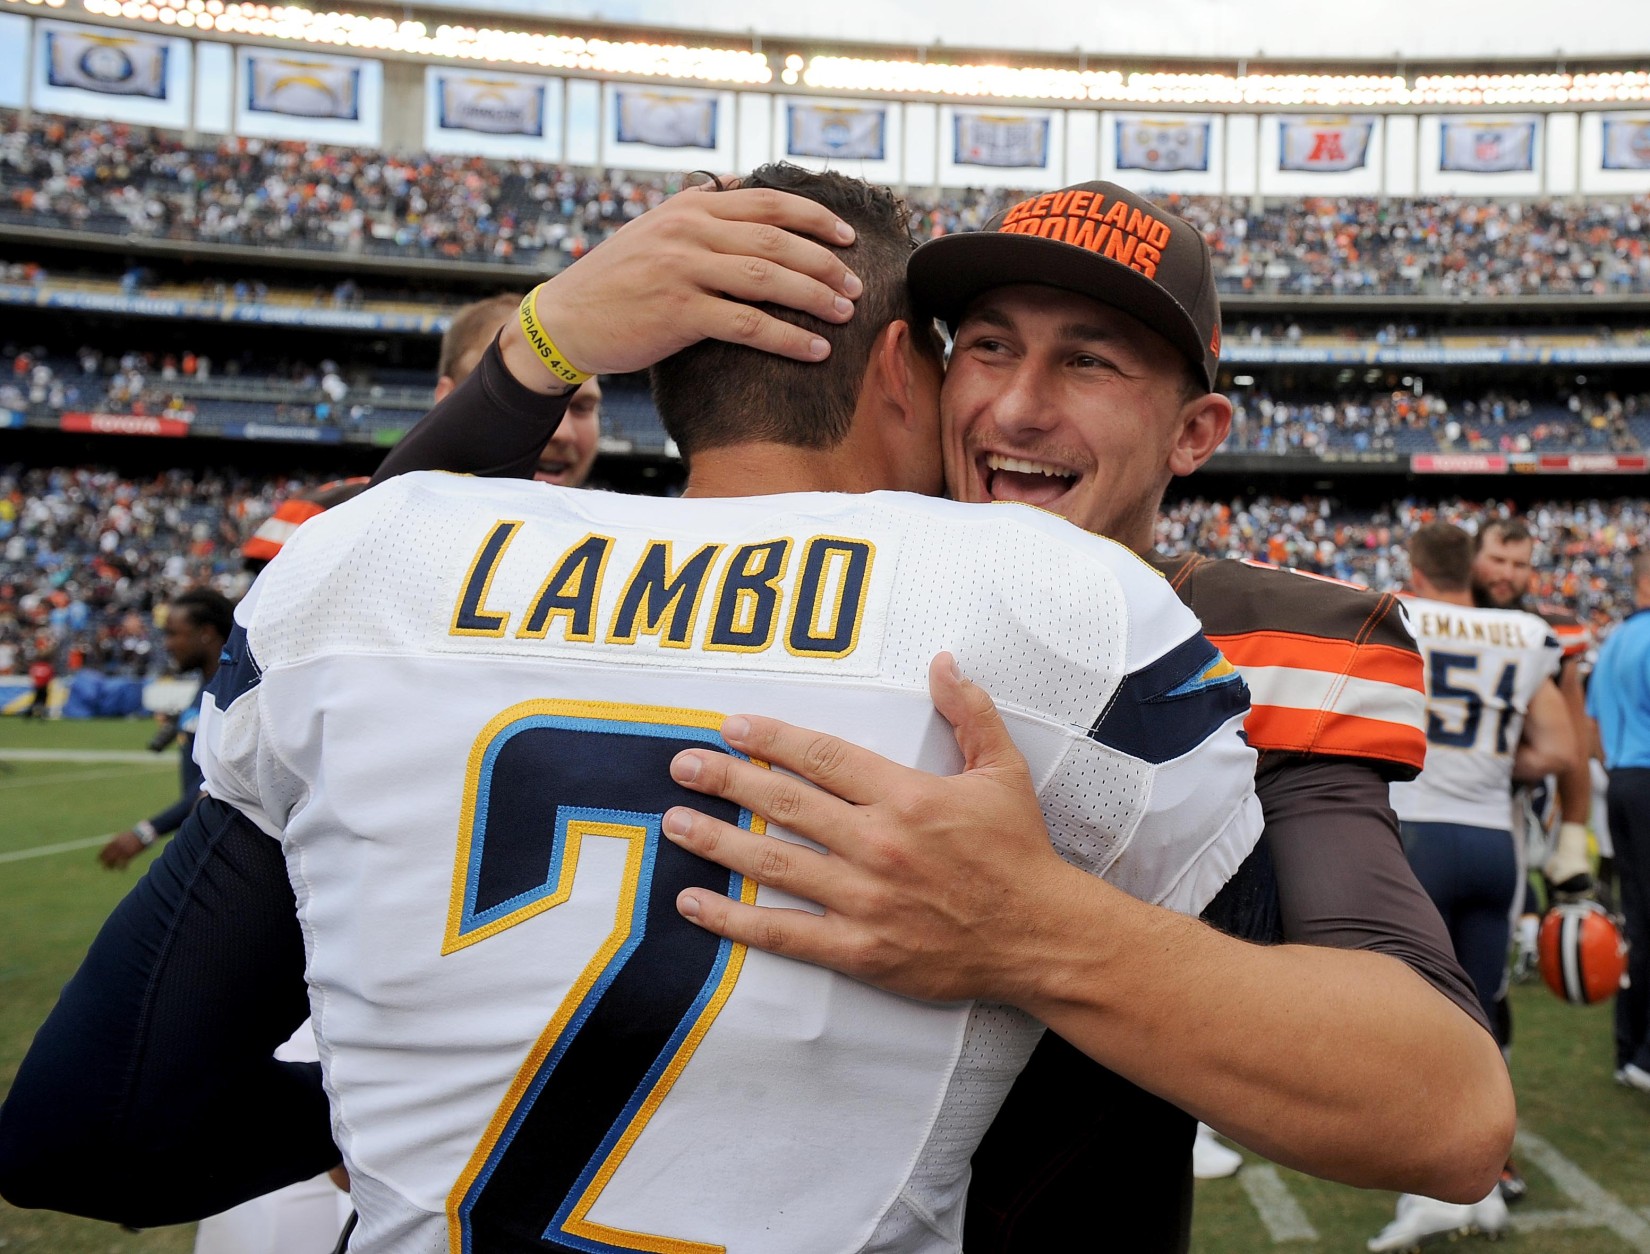 SAN DIEGO, CA- OCTOBER 4:  Johnny Manziel #2 of the Cleveland Browns hugs Josh Lambo #2 of the San Diego Chargers after Lambo kicked game-winning field goal against the Cleveland Browns during their NFL Game on October 4, 2015 in San Diego, California. (Photo by Donald Miralle/Getty Images)